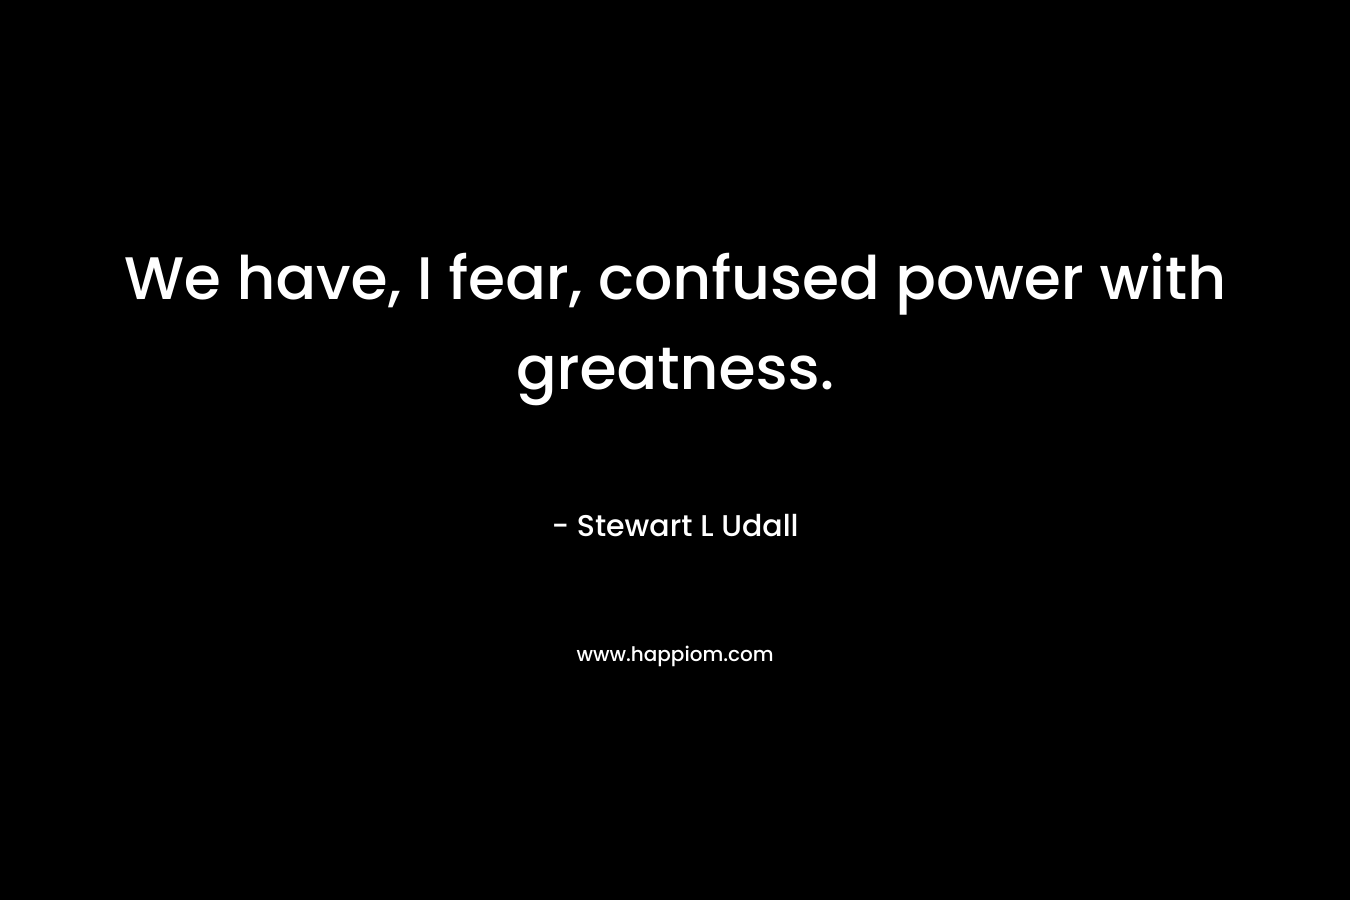 We have, I fear, confused power with greatness. – Stewart L Udall